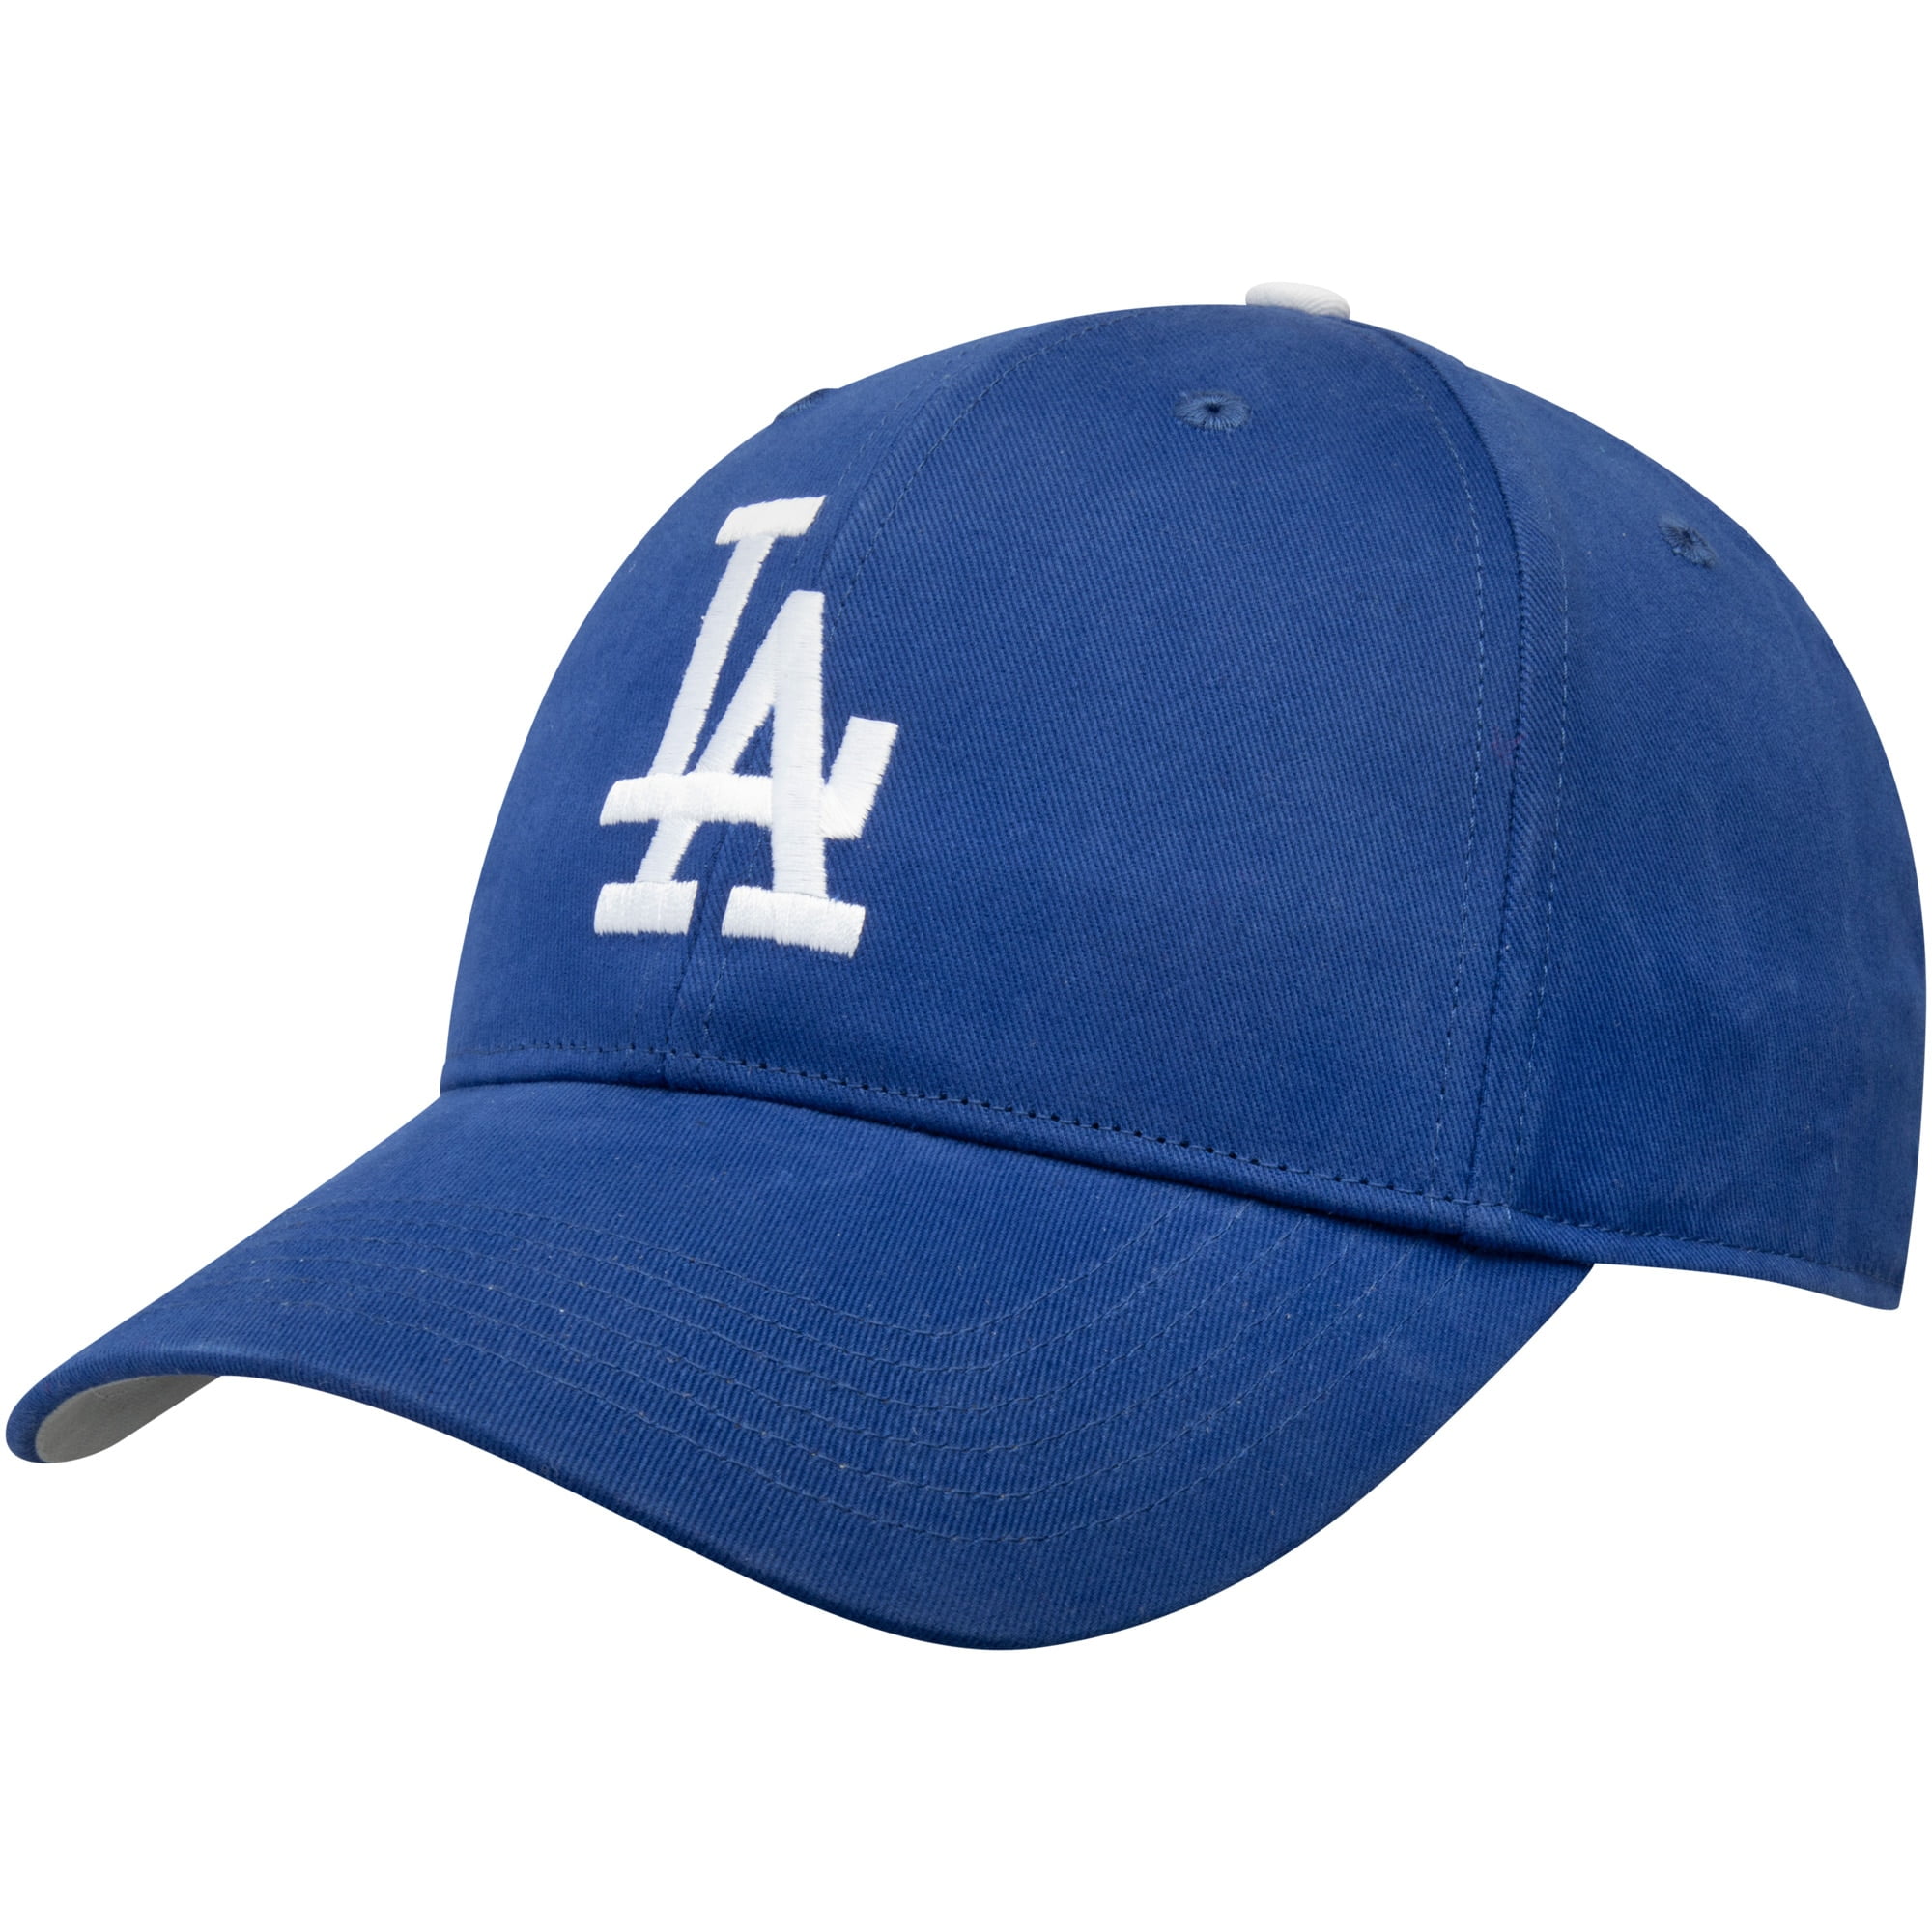 Los Angeles Dodgers All-Star Game MLB Fan Apparel & Souvenirs for